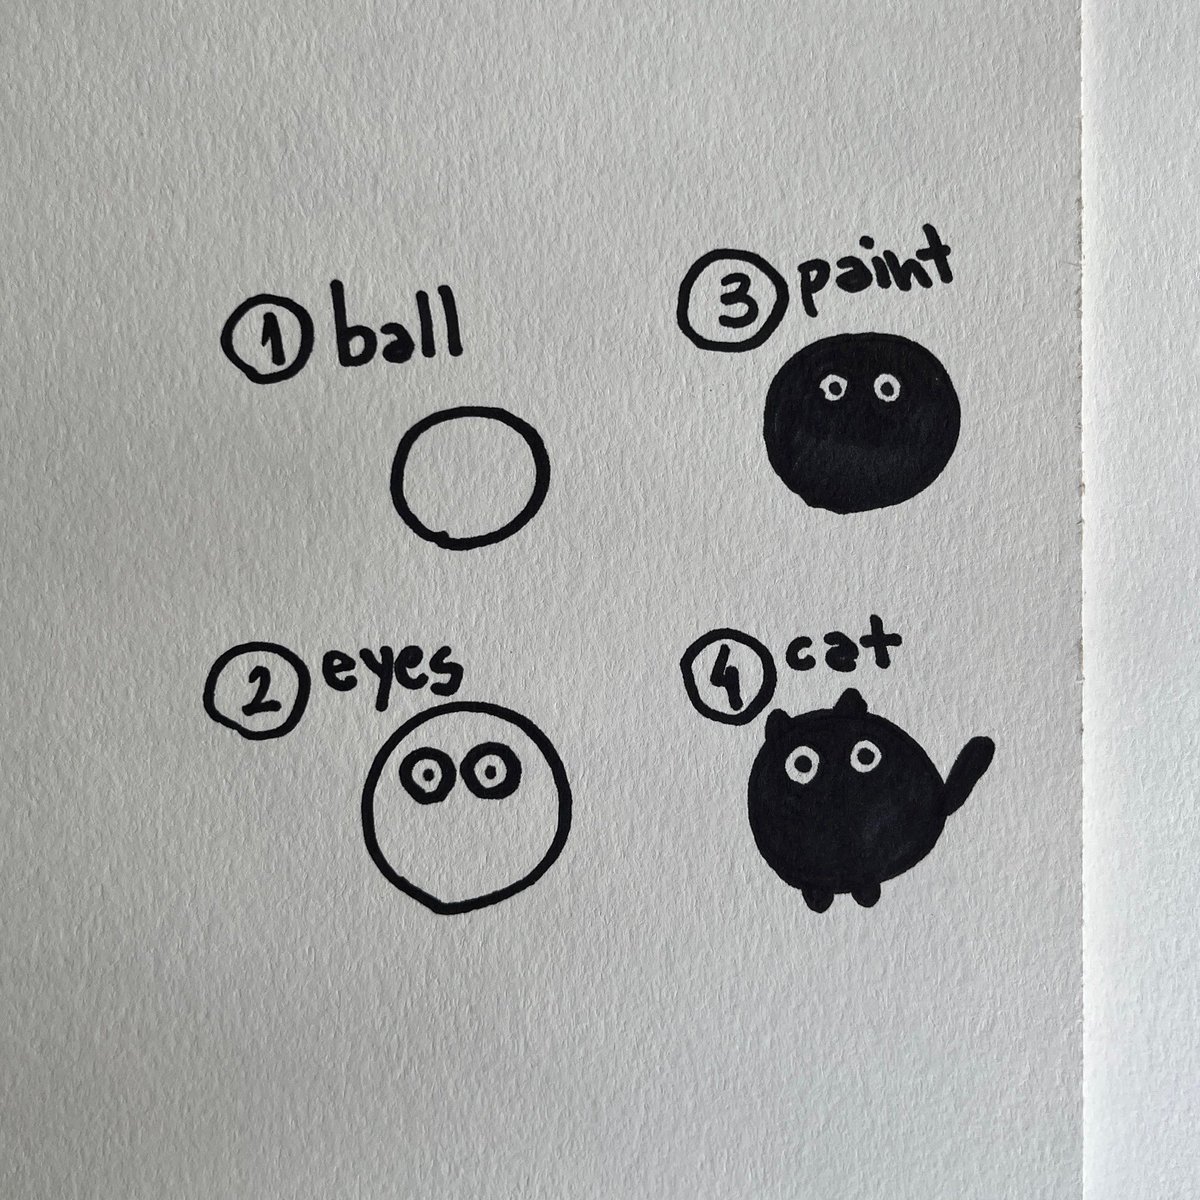 the how to draw a black cat tutorial